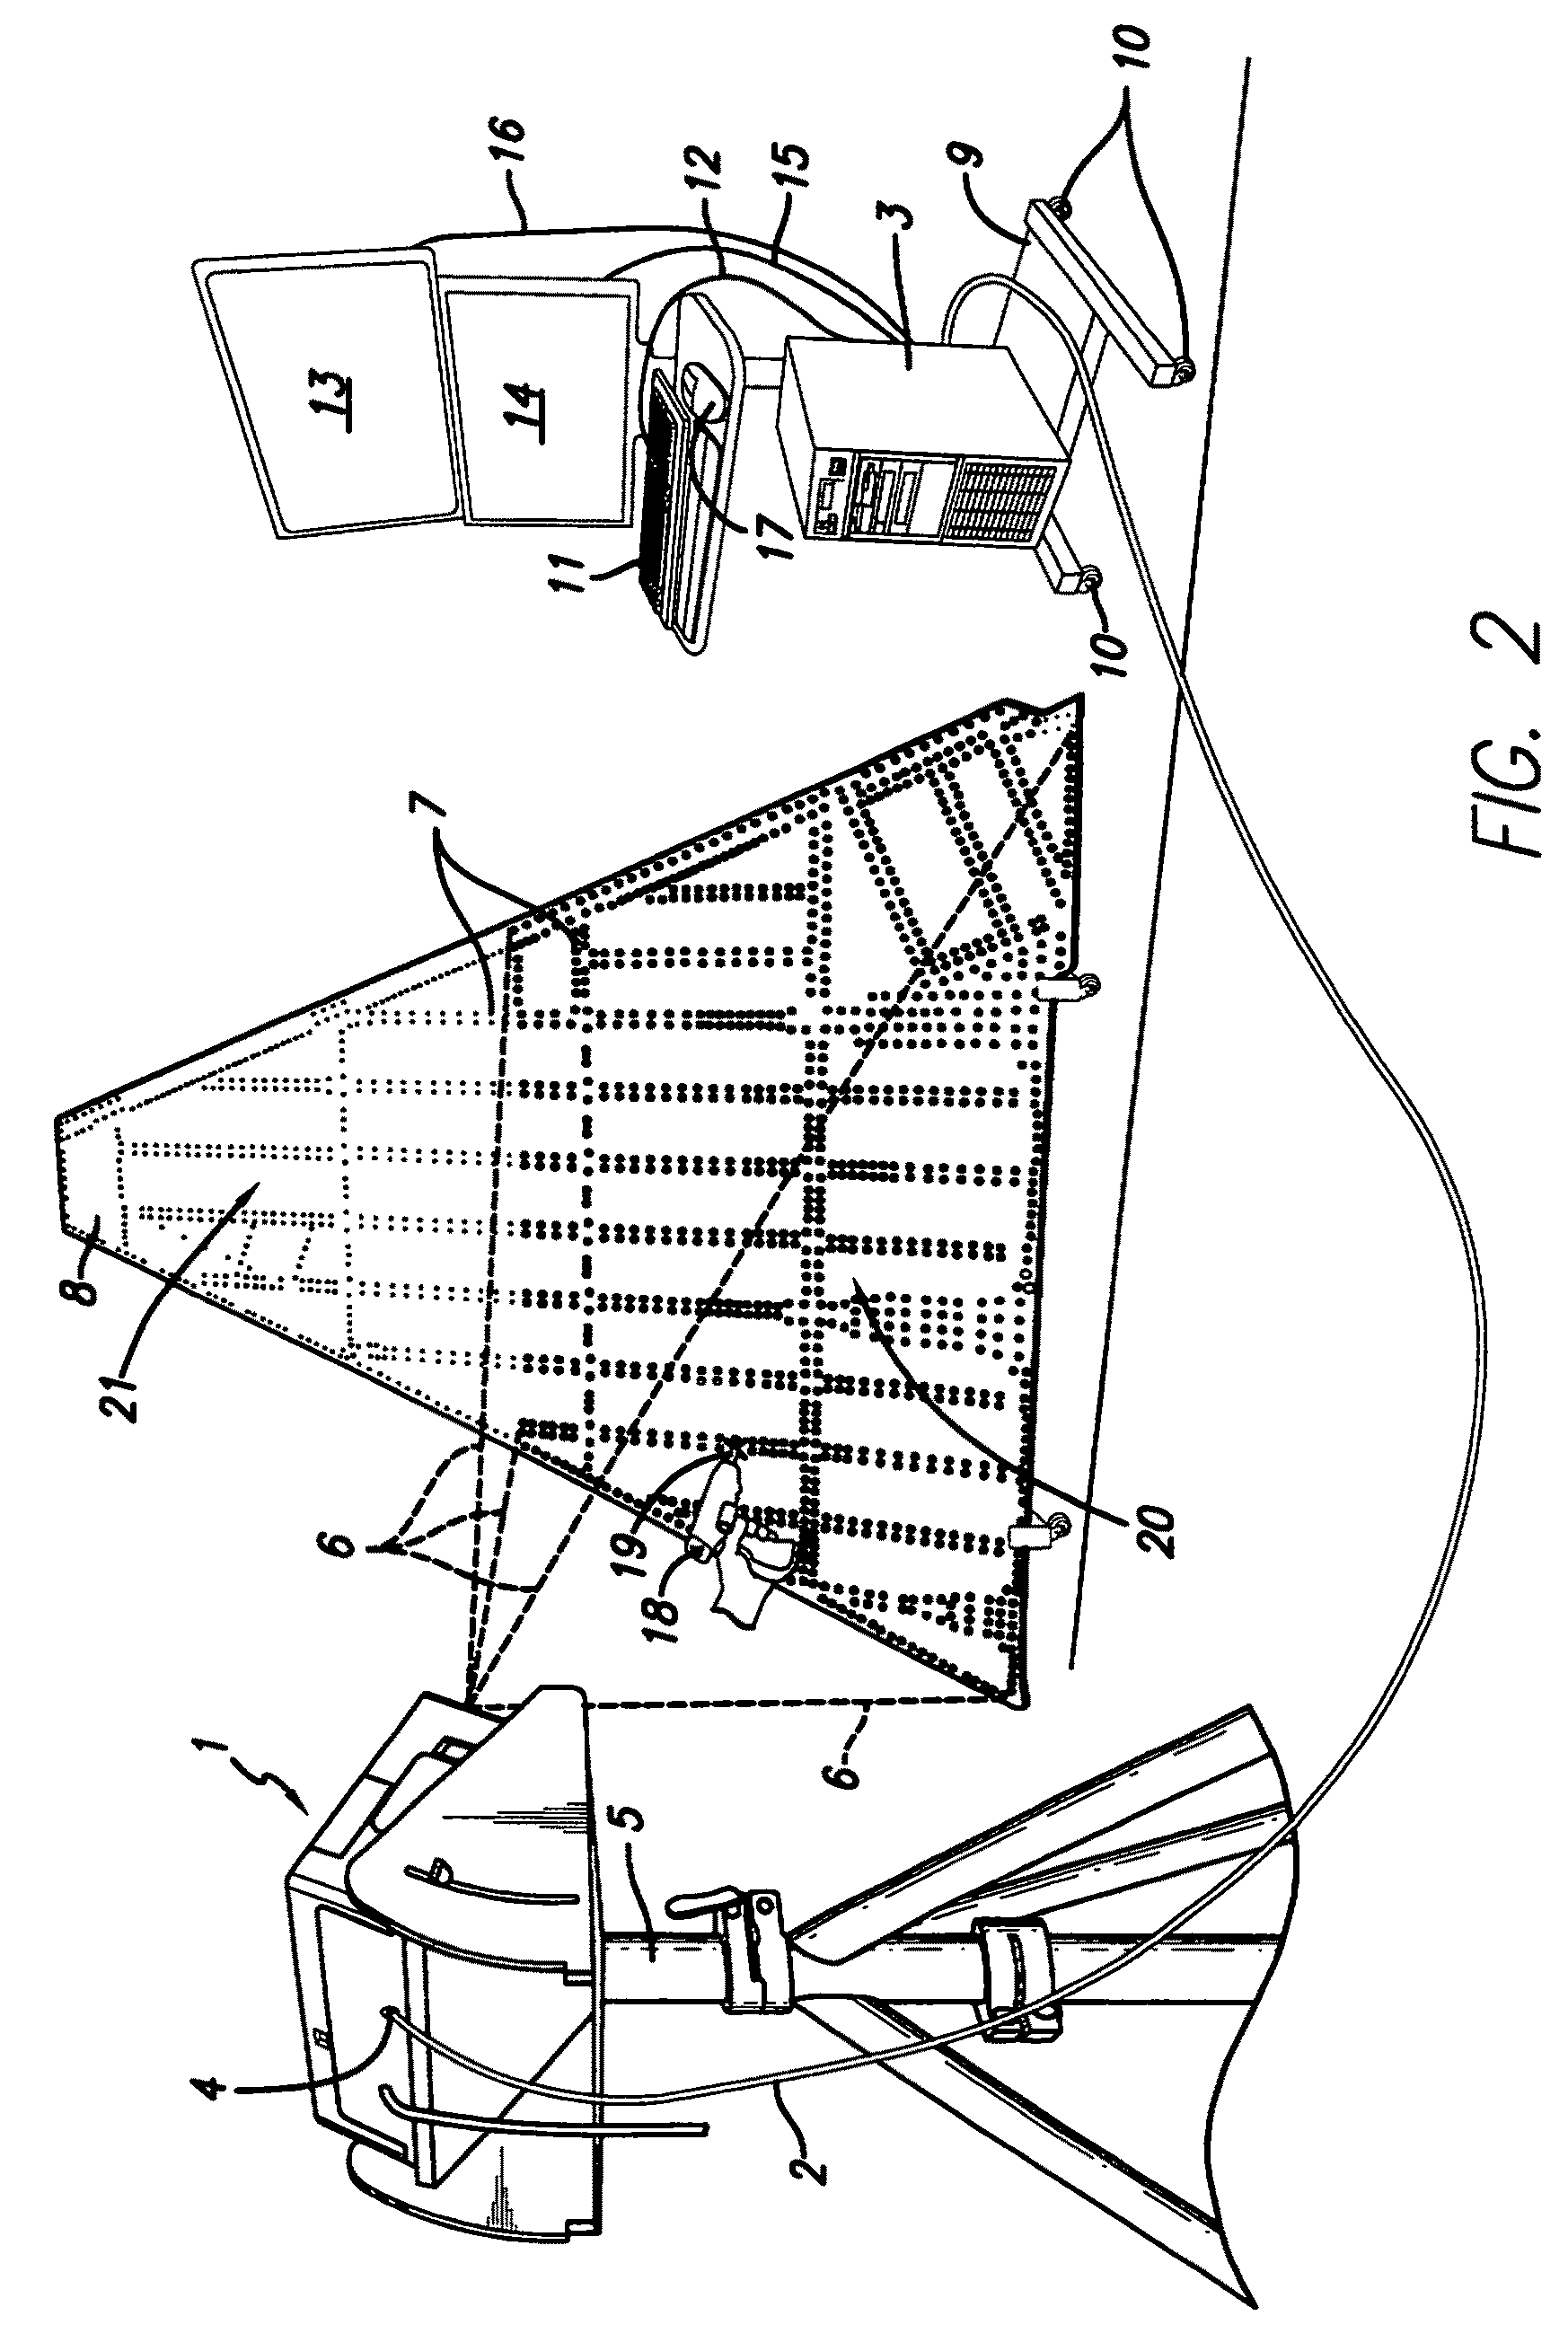 Systems and methods for optically projecting three-dimensional text, images and/or symbols onto three-dimensional objects